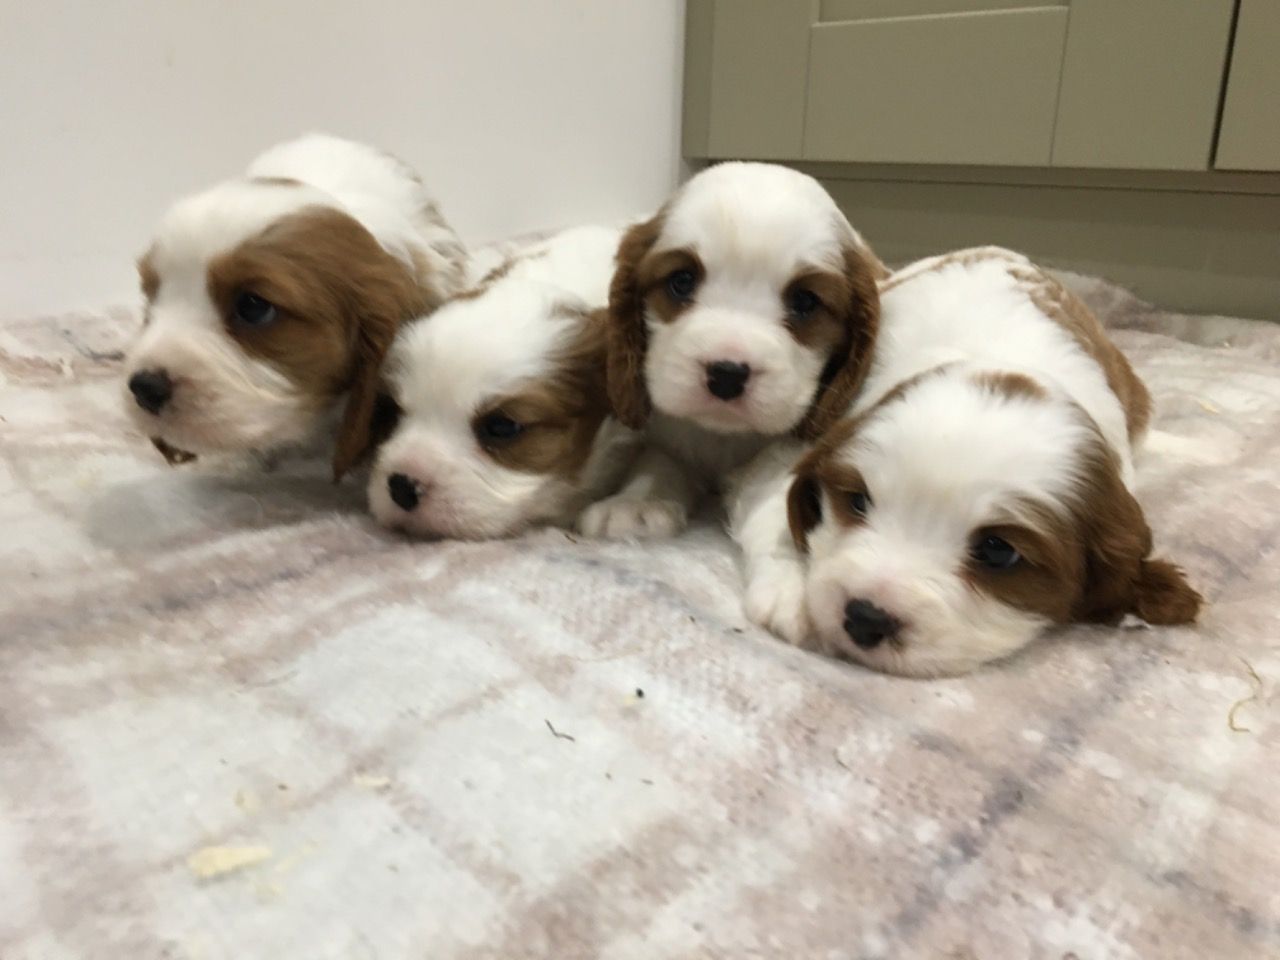 Beautitful Cavalier King Charles Puppies ready for Adoption.